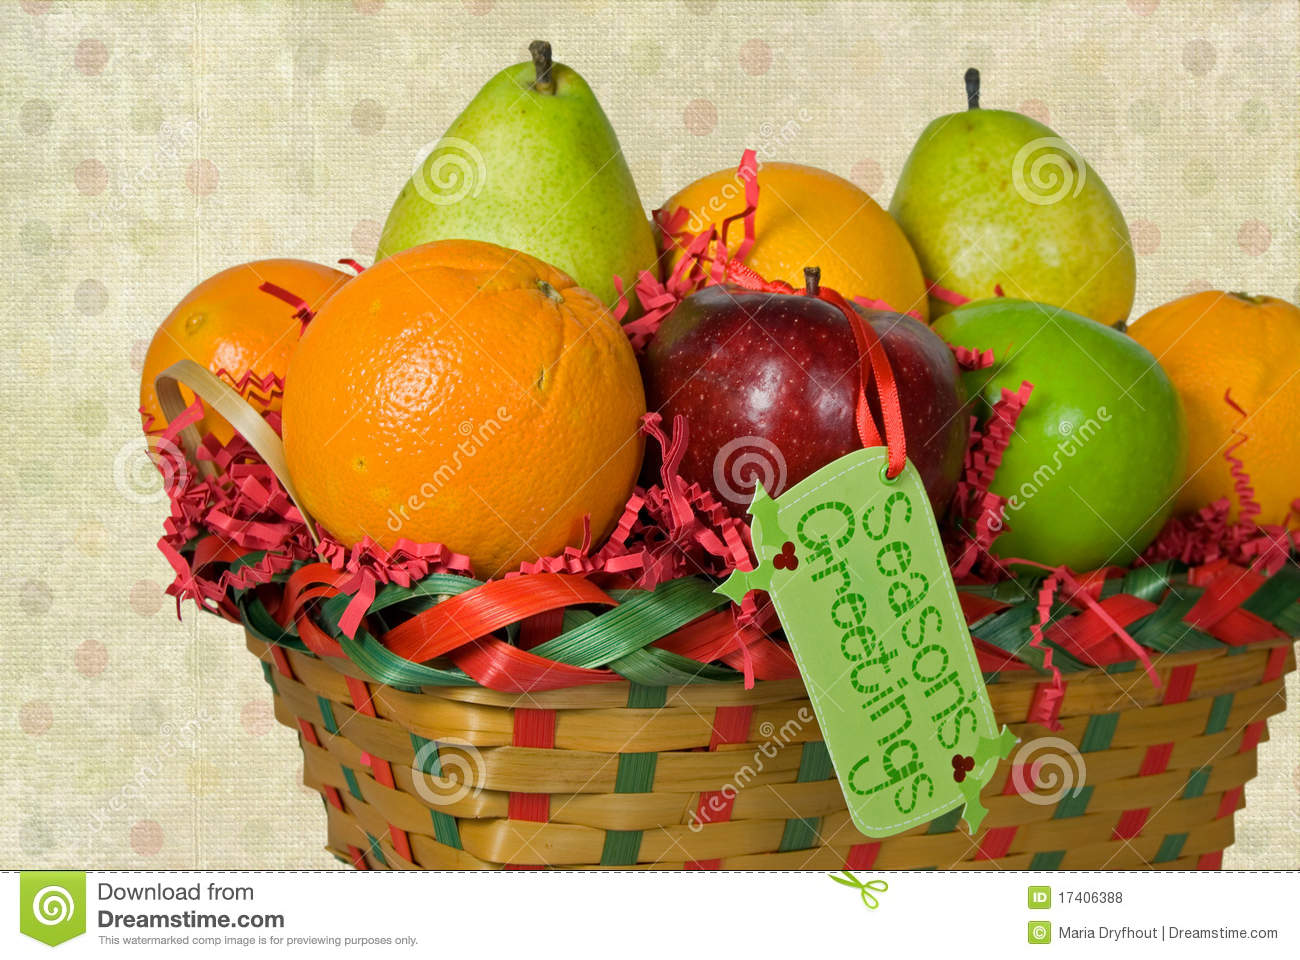 Fresh Fruit In Christmas Fruit Basket With Tag 